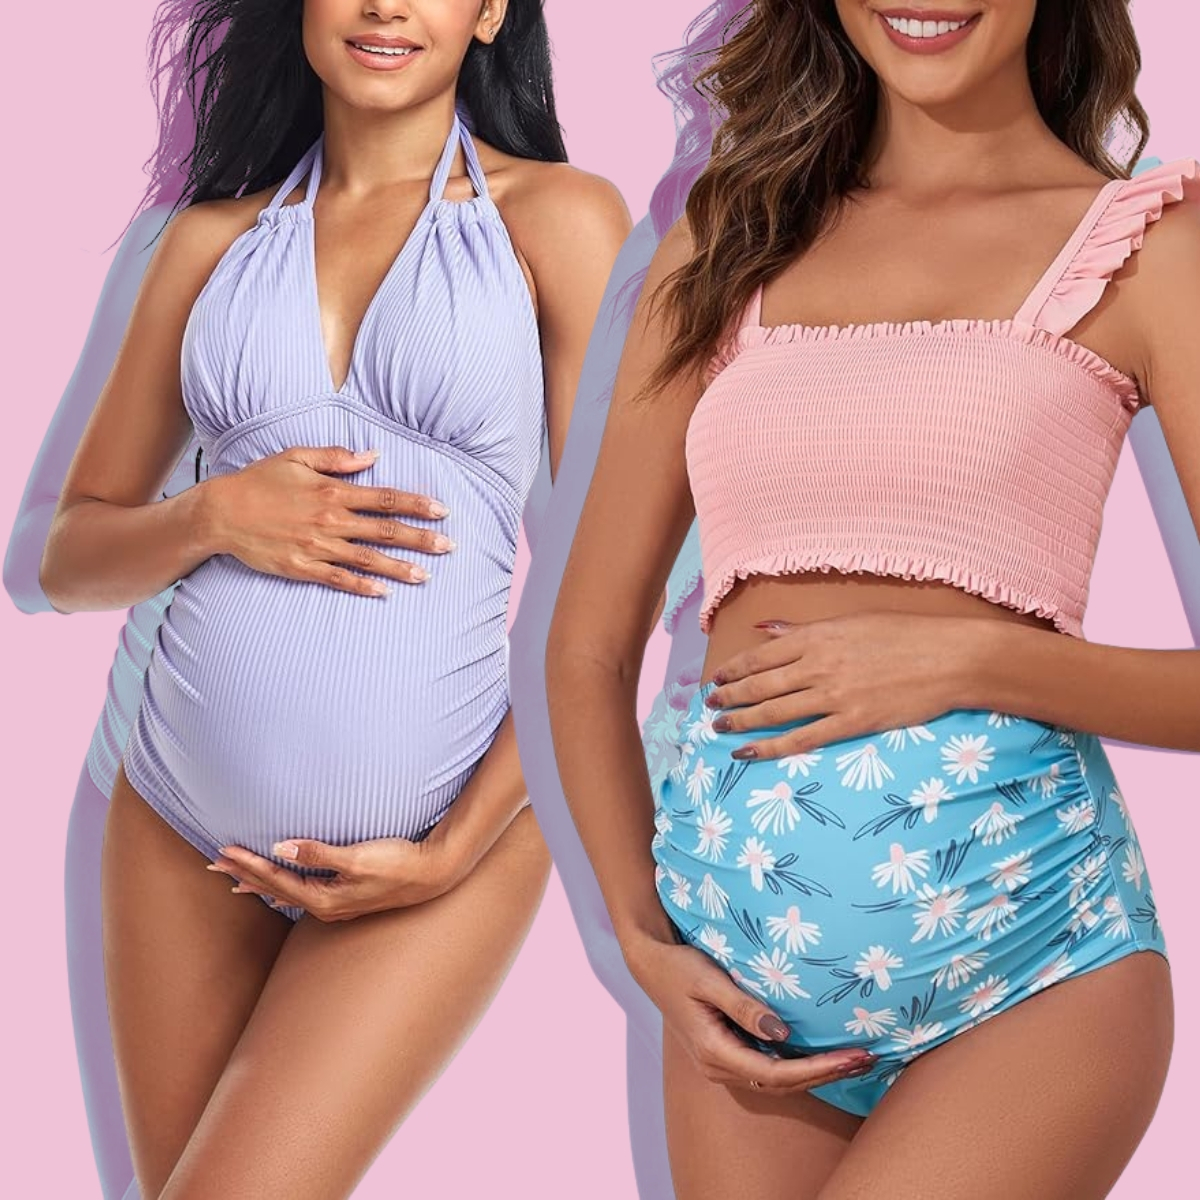 15 of the Best Postpartum Bathing Suits to Keep You Confident in